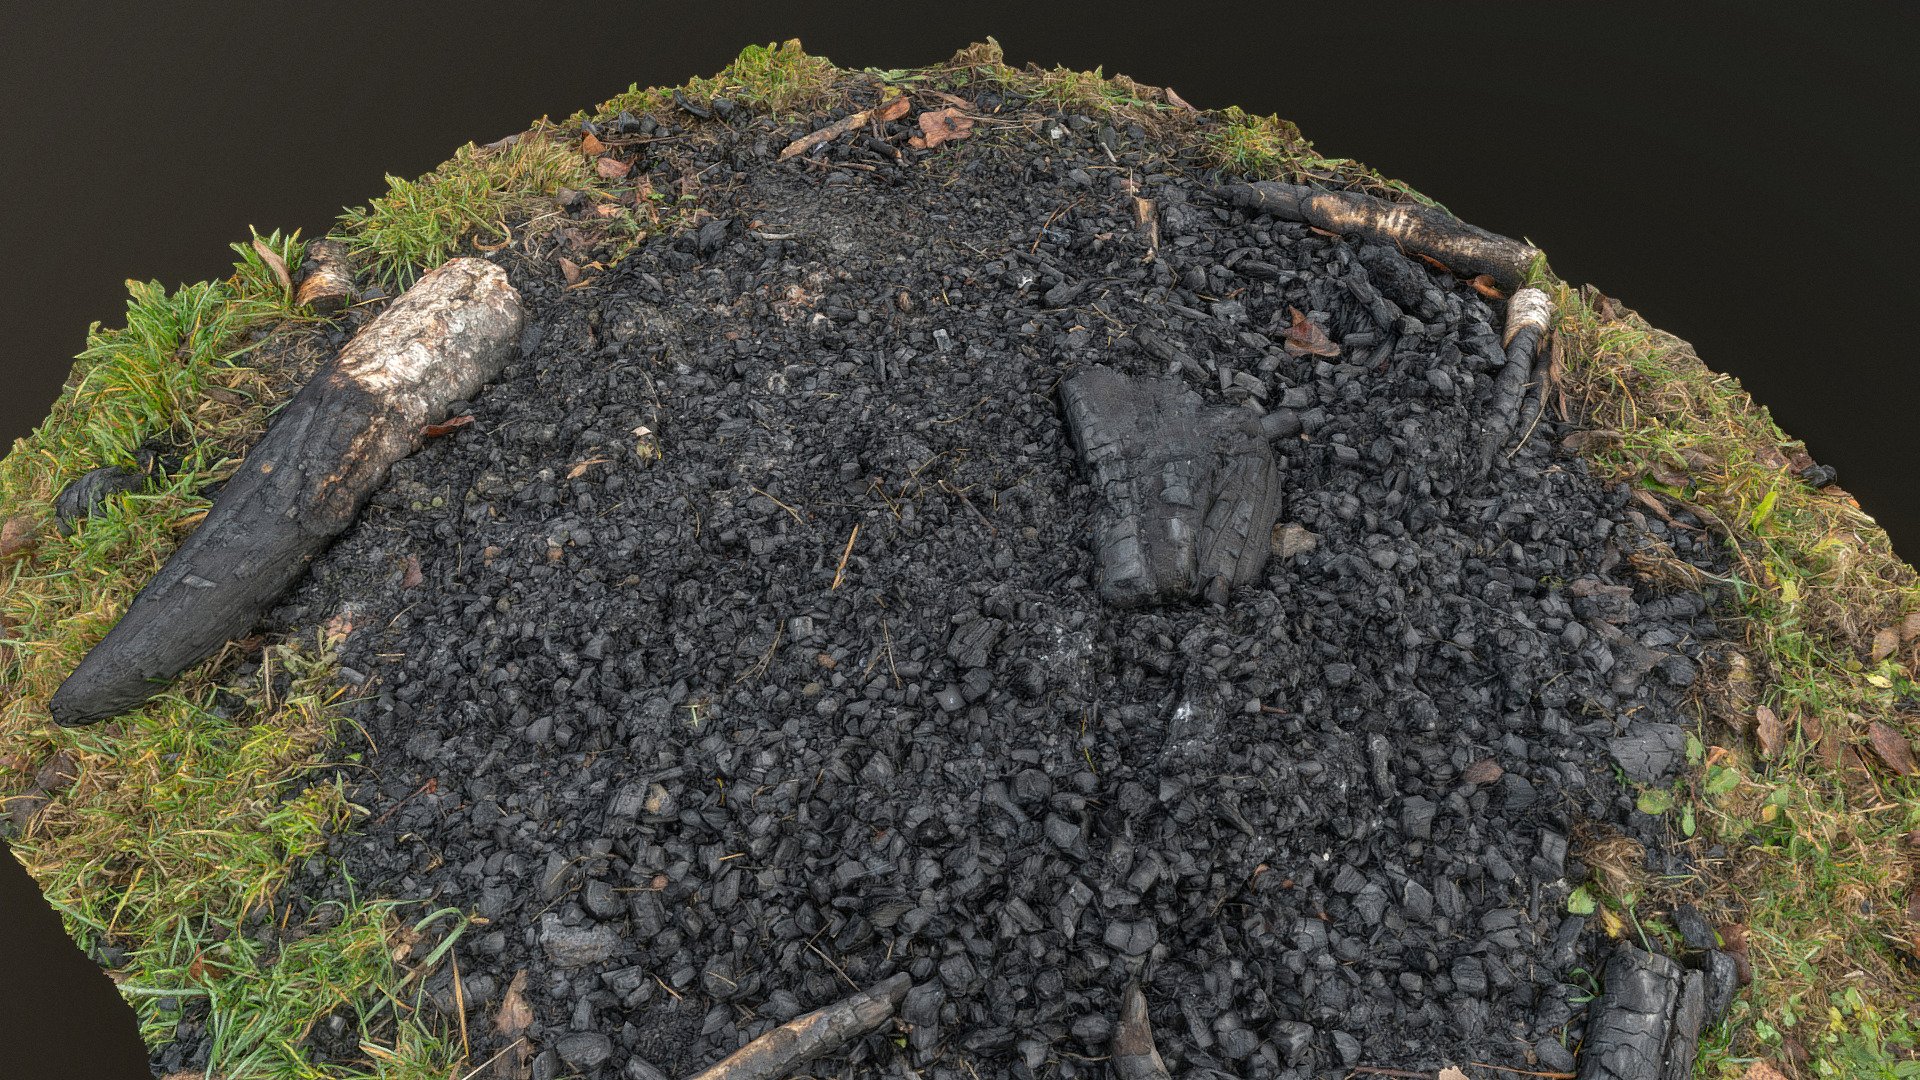 Natural fireplace in grass firepit campfire with burned out black wood ash ember logs

photogrammetry scan (130x24mp), 2x16k textures + HD normals - Natural campfire in grass - Download Free 3D model by matousekfoto 3d model